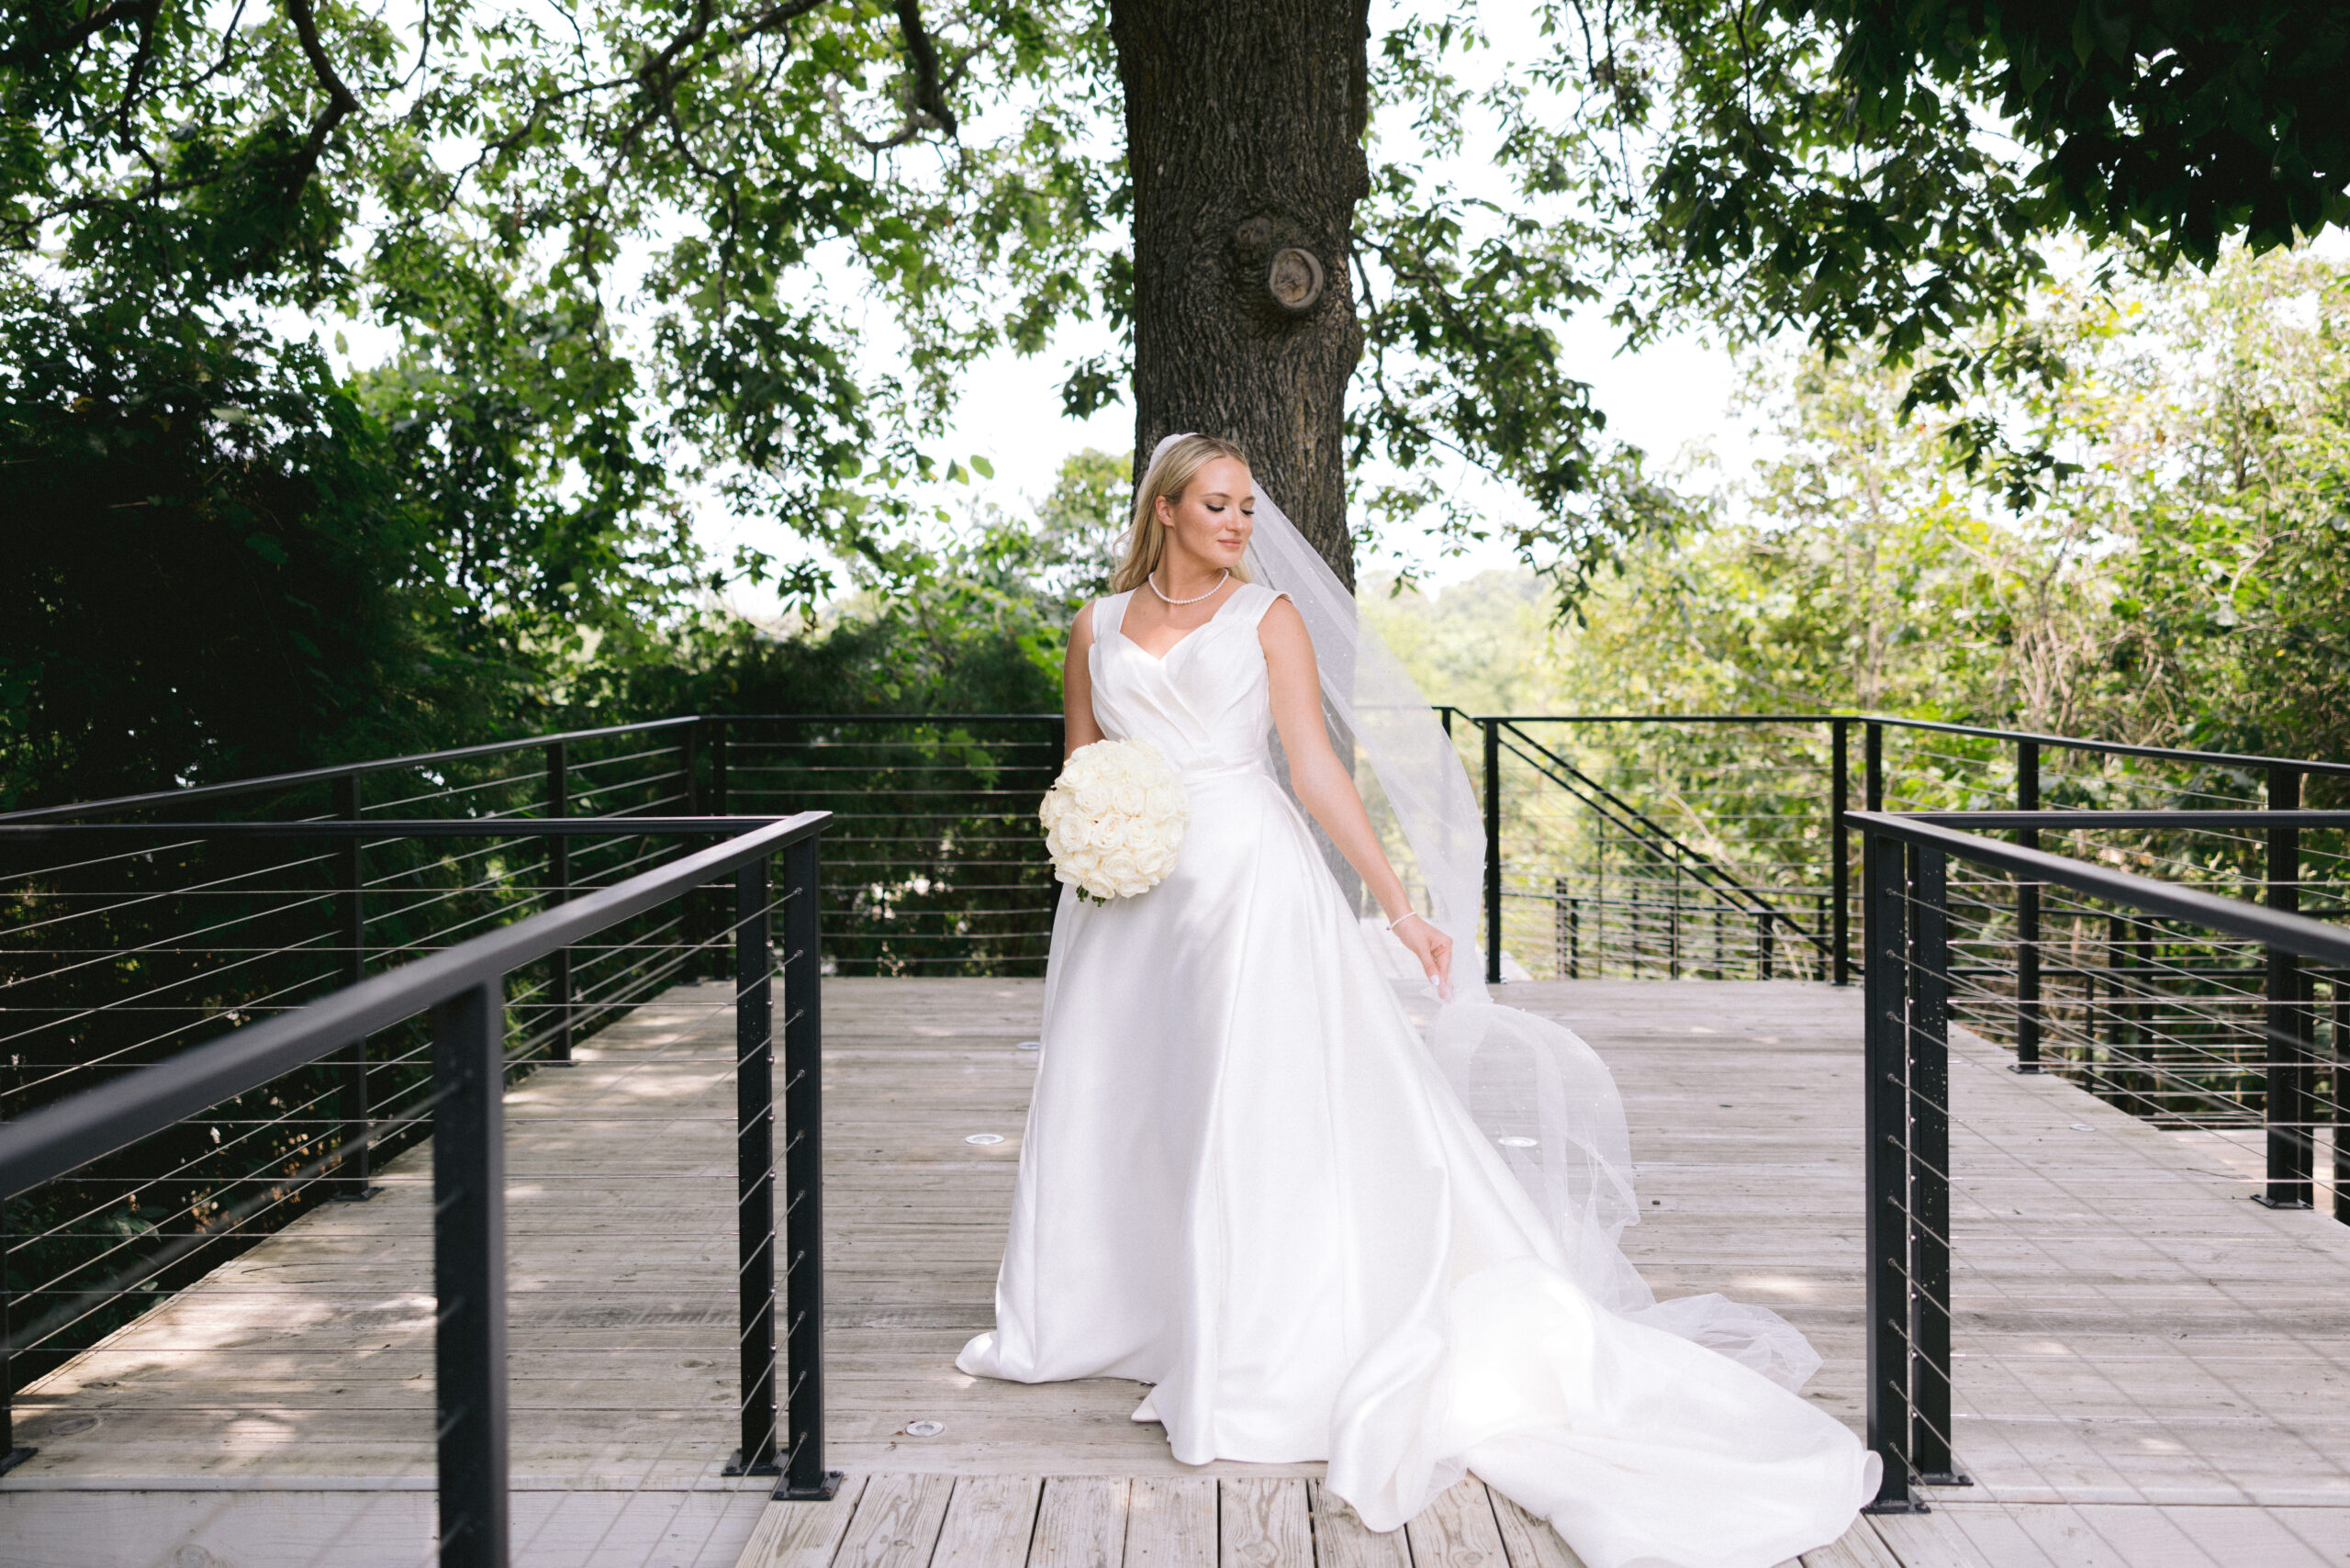 Bridal portrait shot by Tatyana Zadorin Photography at the Greenhouse two rivers. Branson, MO wedding photographer. Bride in her wedding dress